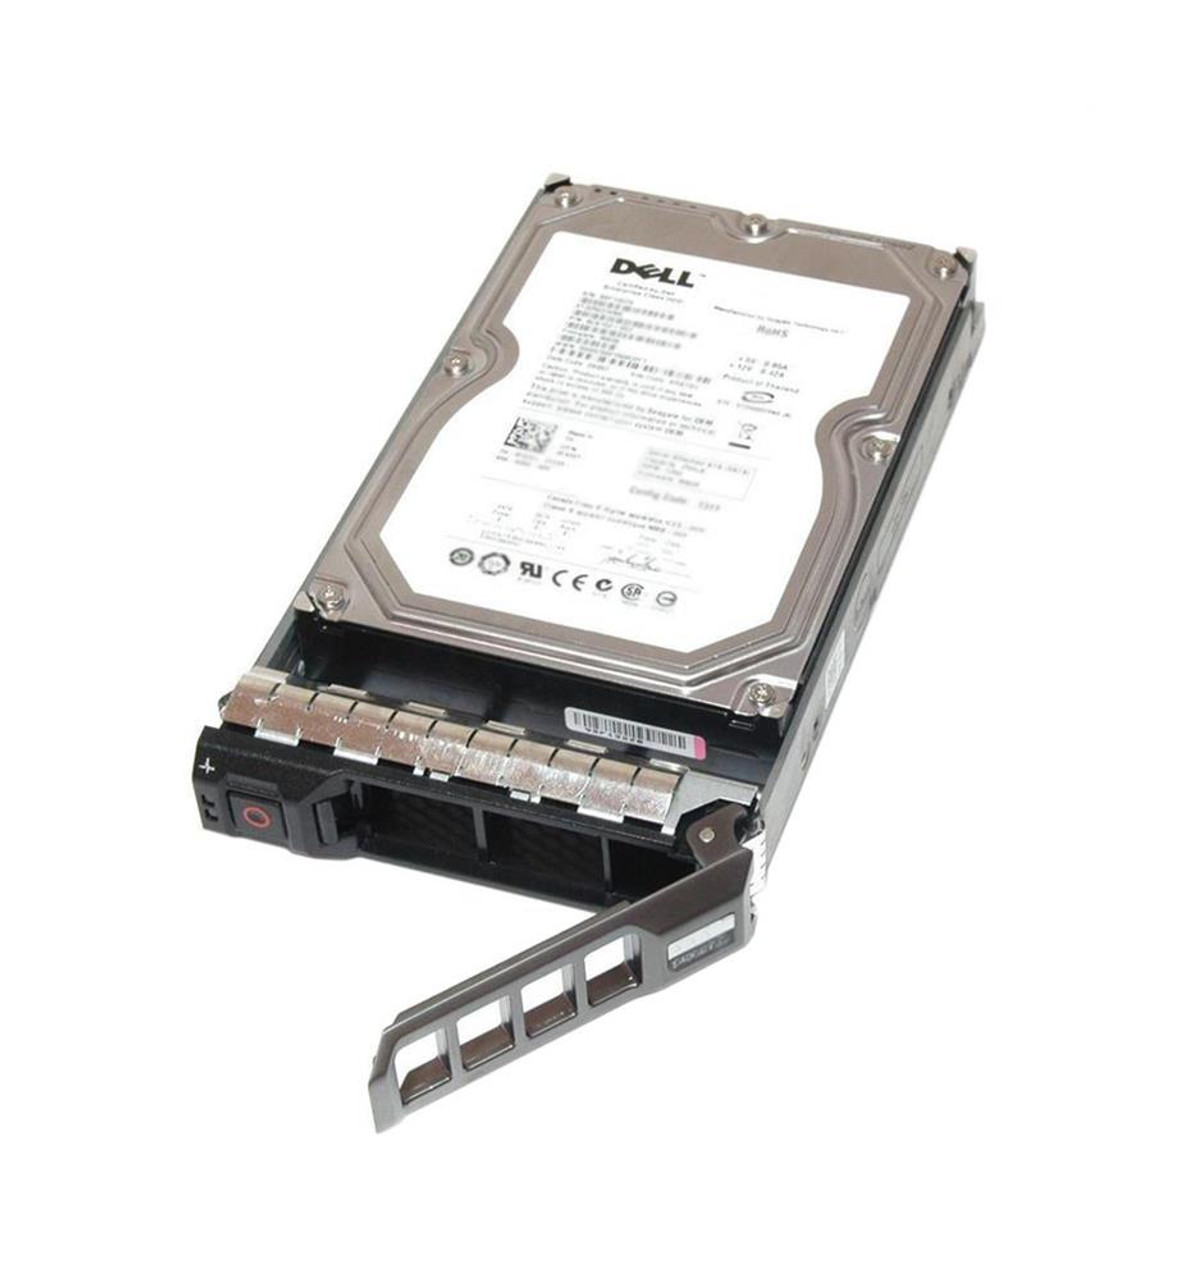 400-AXLE Dell 12TB 7200RPM SAS 12Gbps Nearline Hot Swap (FIPS 140 SED / 512n) 3.5-inch Internal Hard Drive with Tray